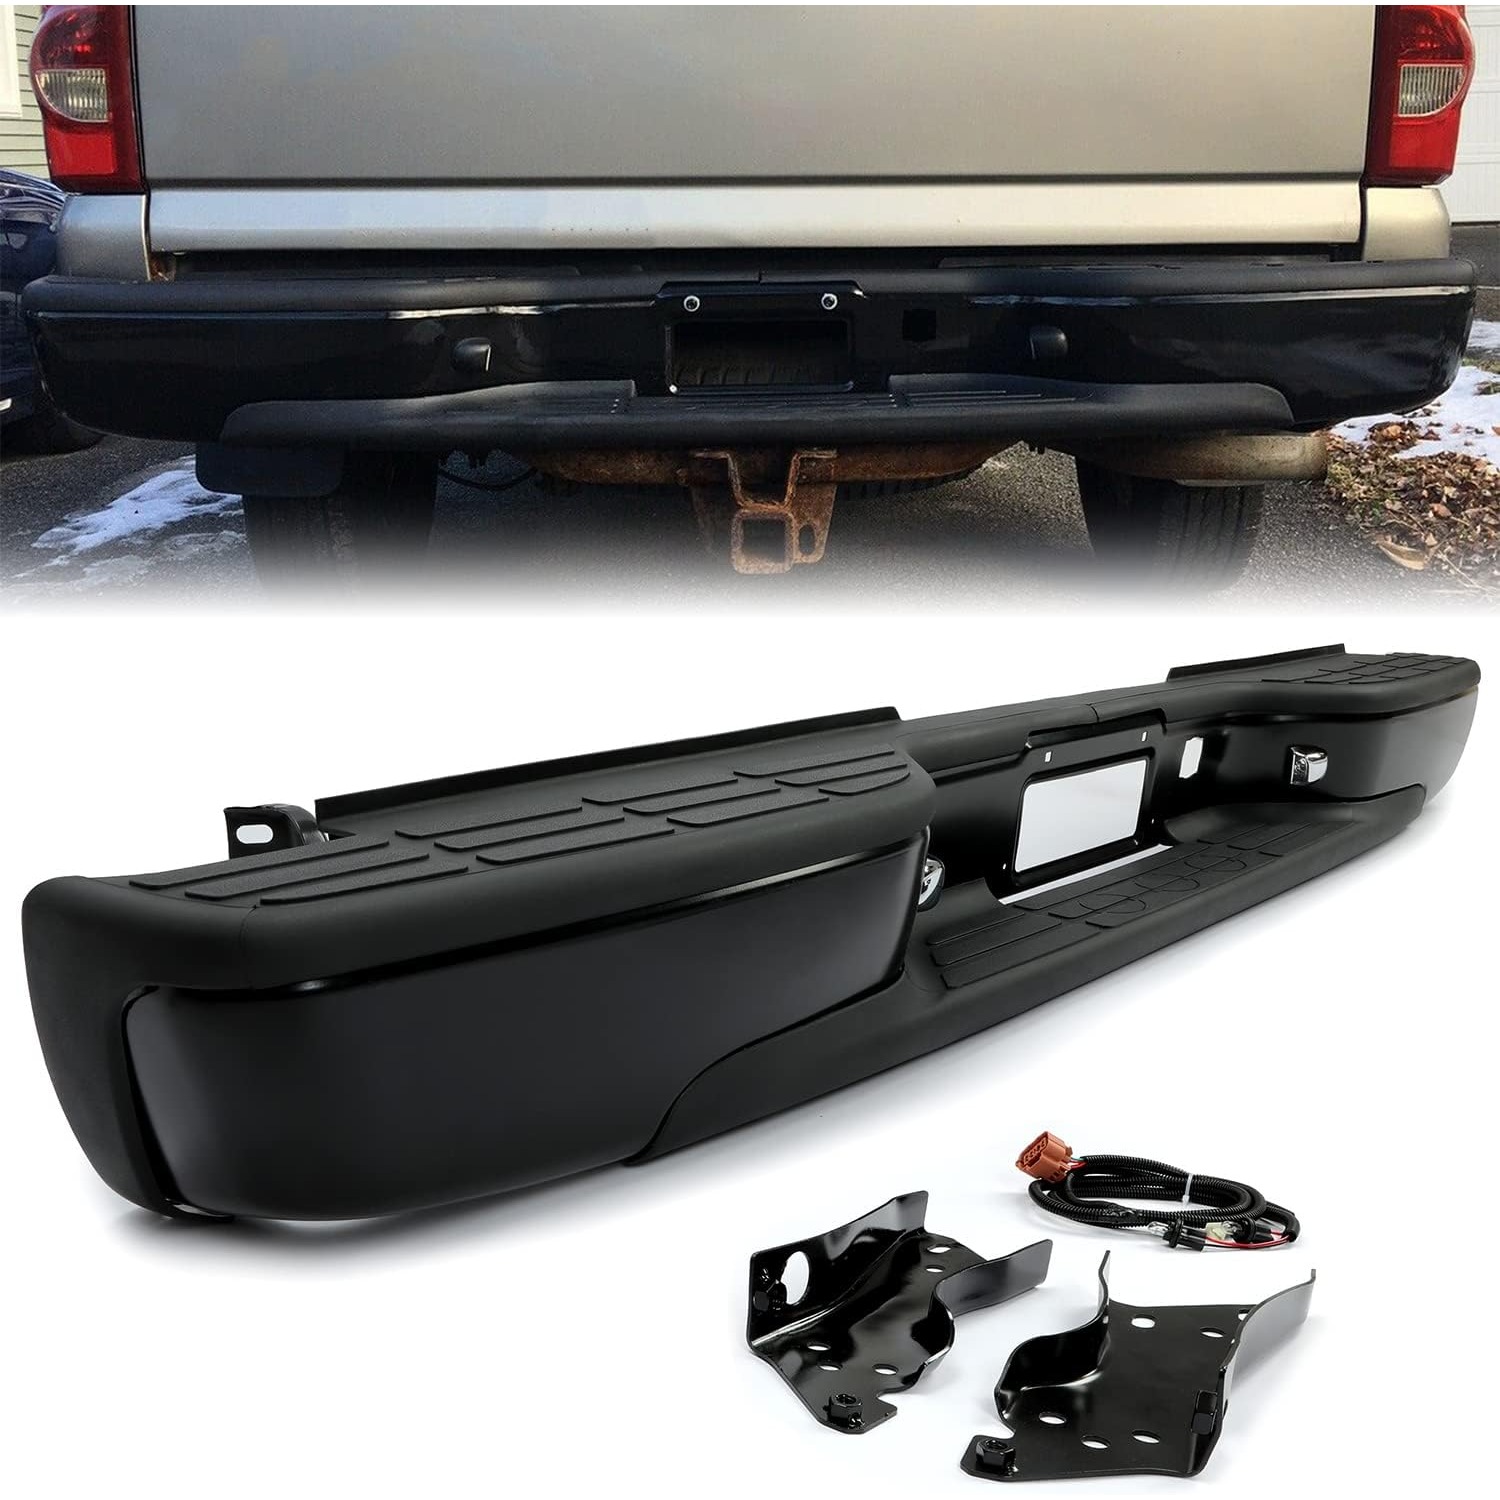 

Powder Coated Black Rear Step Bumper For 1999-2007 & 15002500 Classic Includes License Plate Lights Replaces Gm1103122, 12496085, Gm1103124